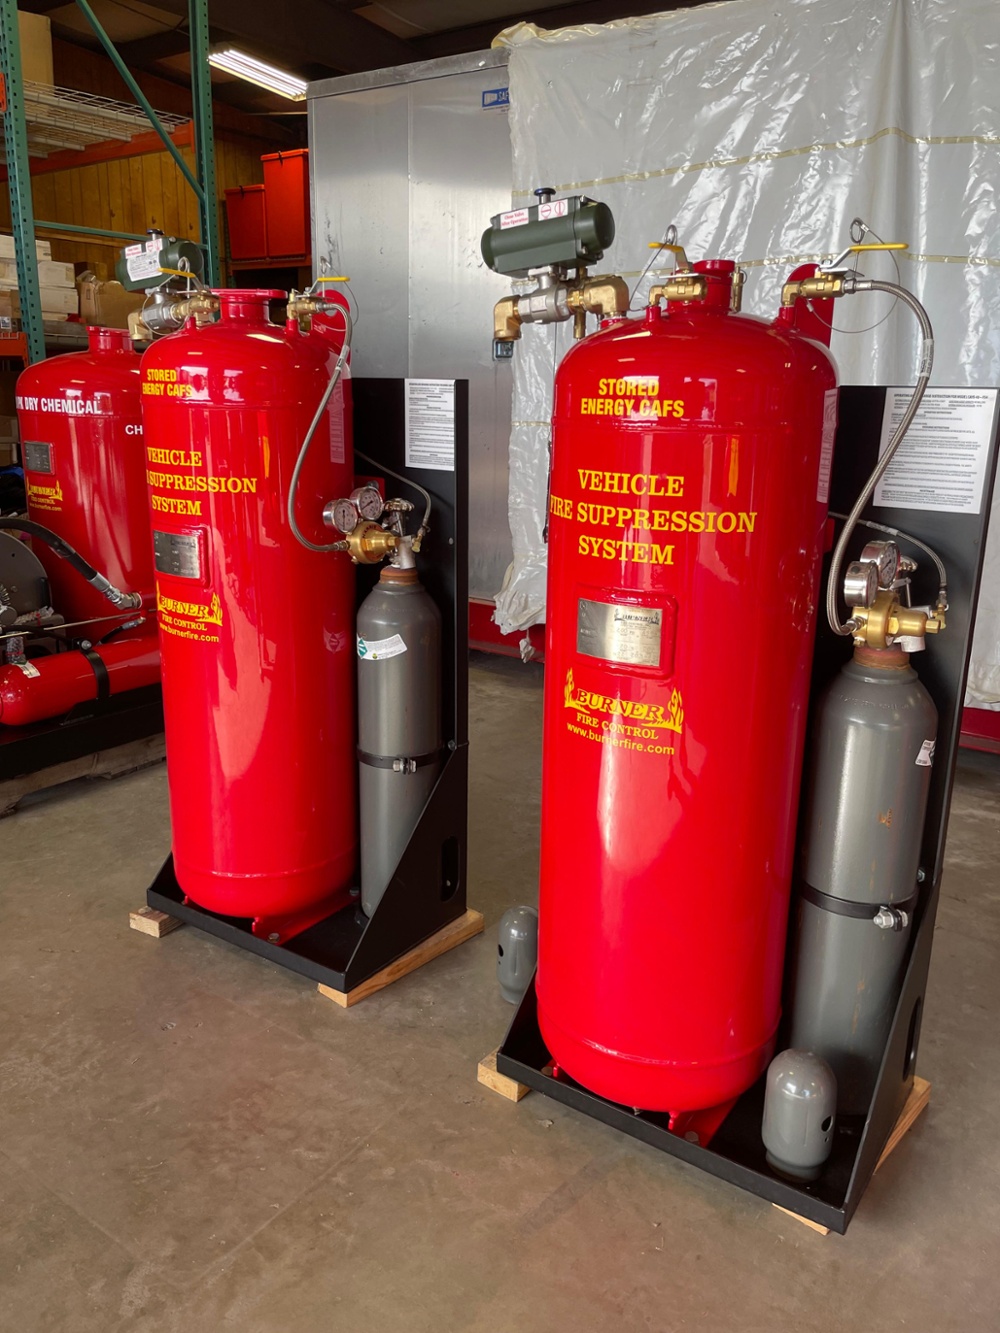 Wellsite Fire Protection for Hydraulic Fracturing Facilities